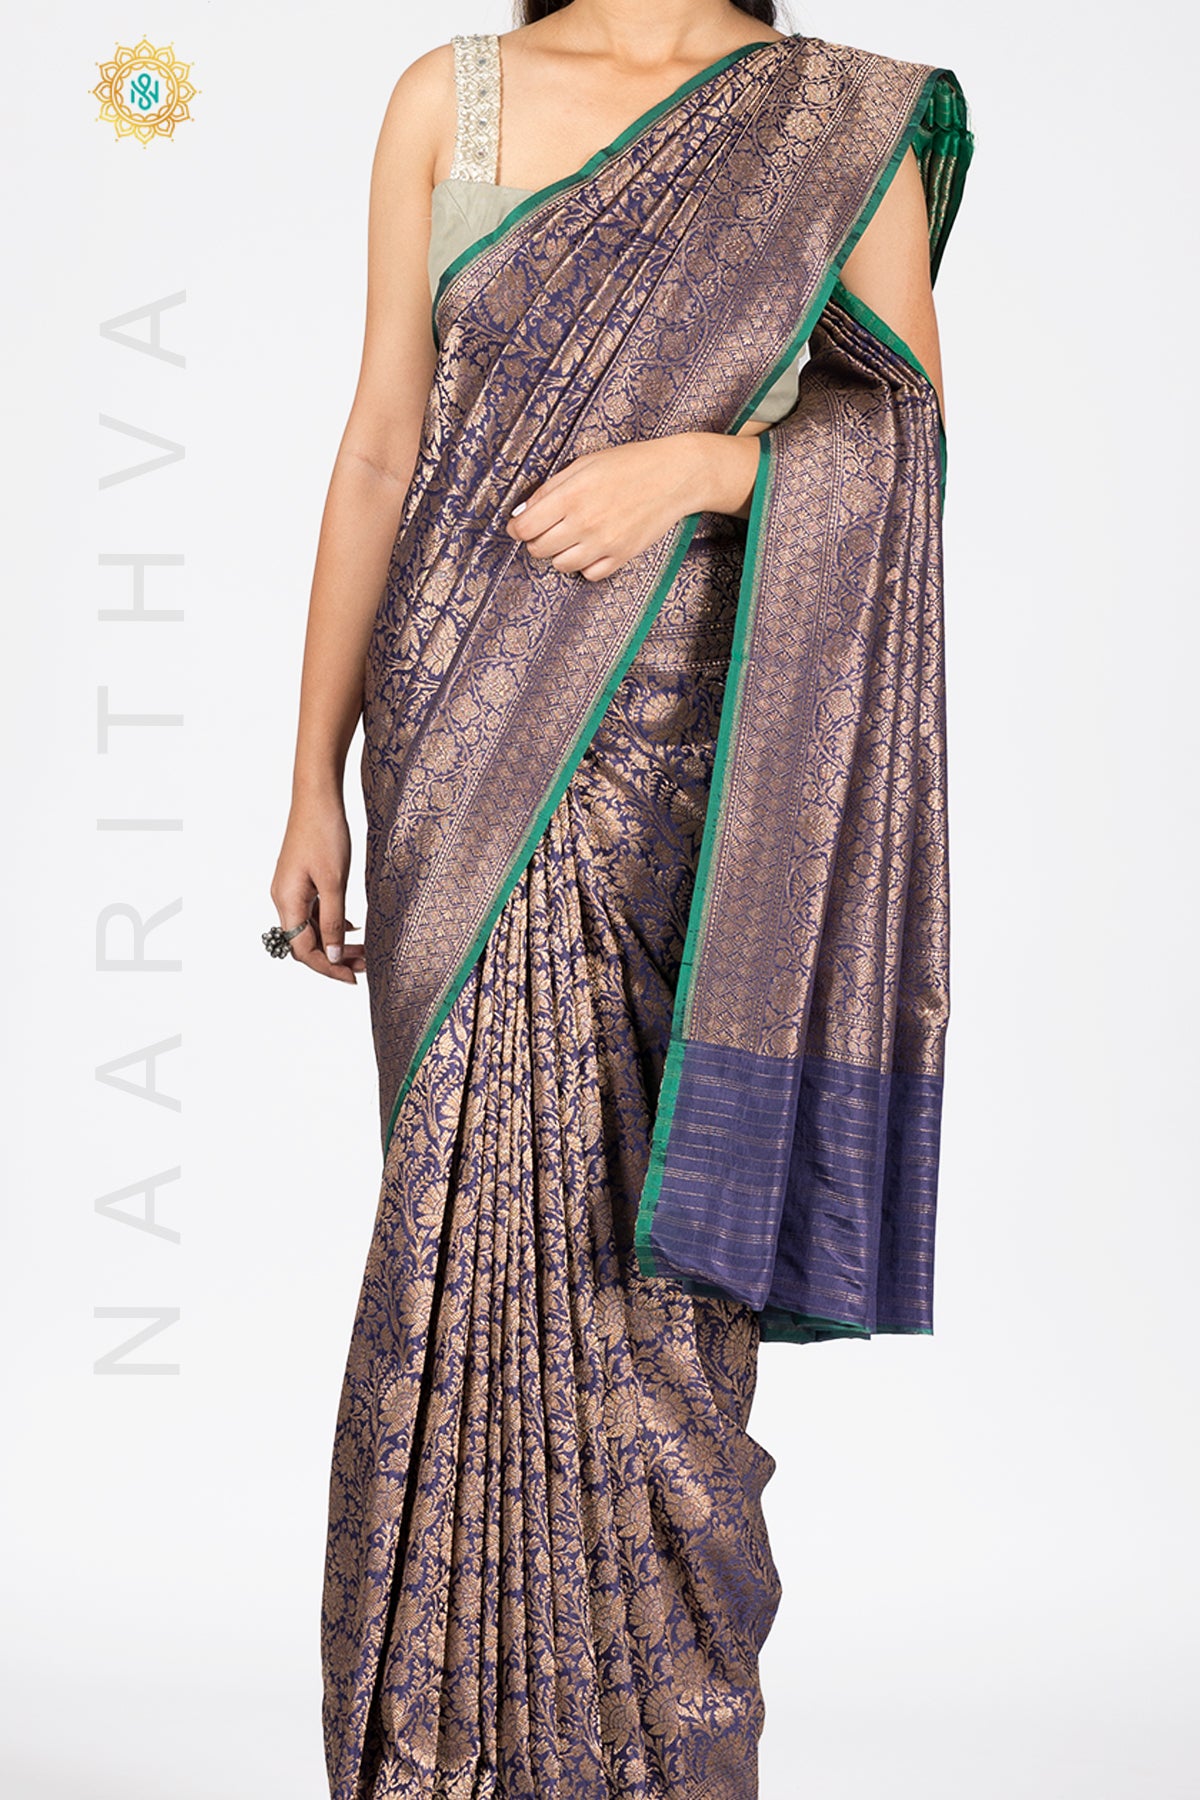 BLUE WITH GREEN - PURE HANDLOOM KATAN SILK WITH ANTIQUE ZARI WEAVES & CONTRAST BLOUSE